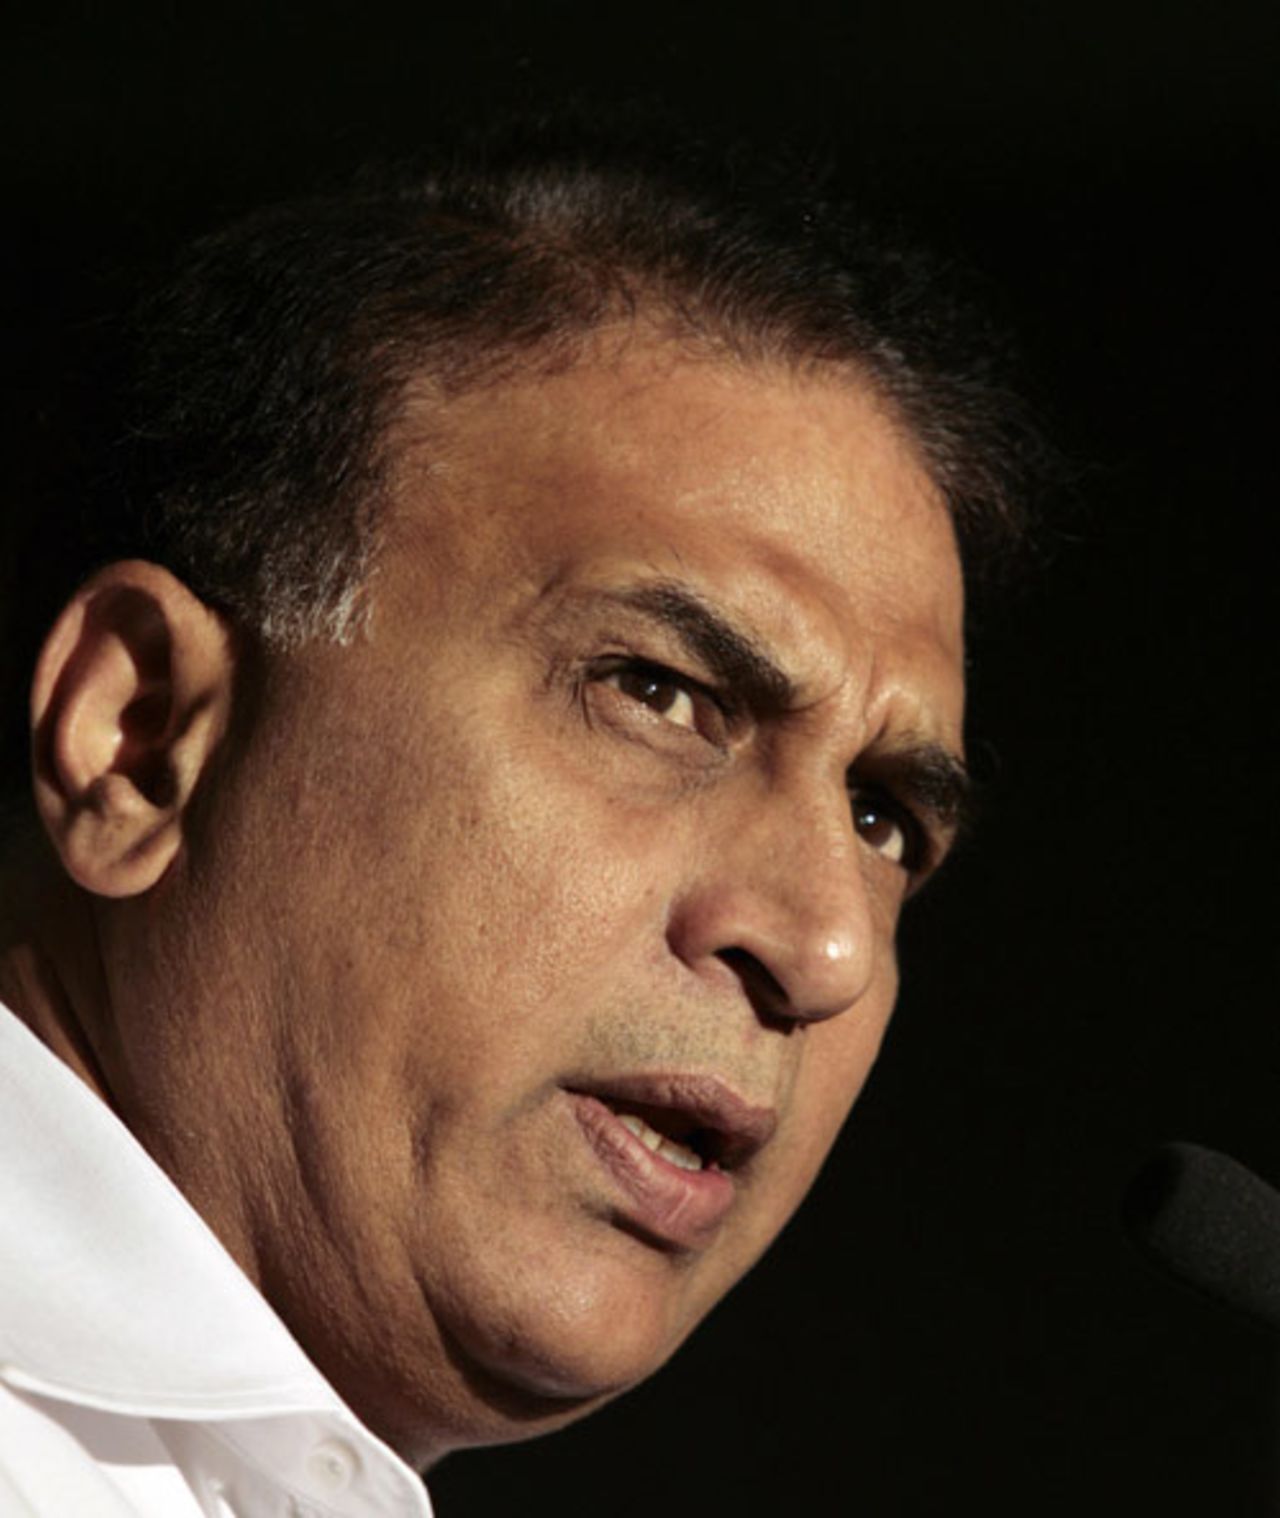 Sunil Gavaskar at a function celebrating the silver jubilee of the 1983 World Cup win, Bangalore, June 3, 2008